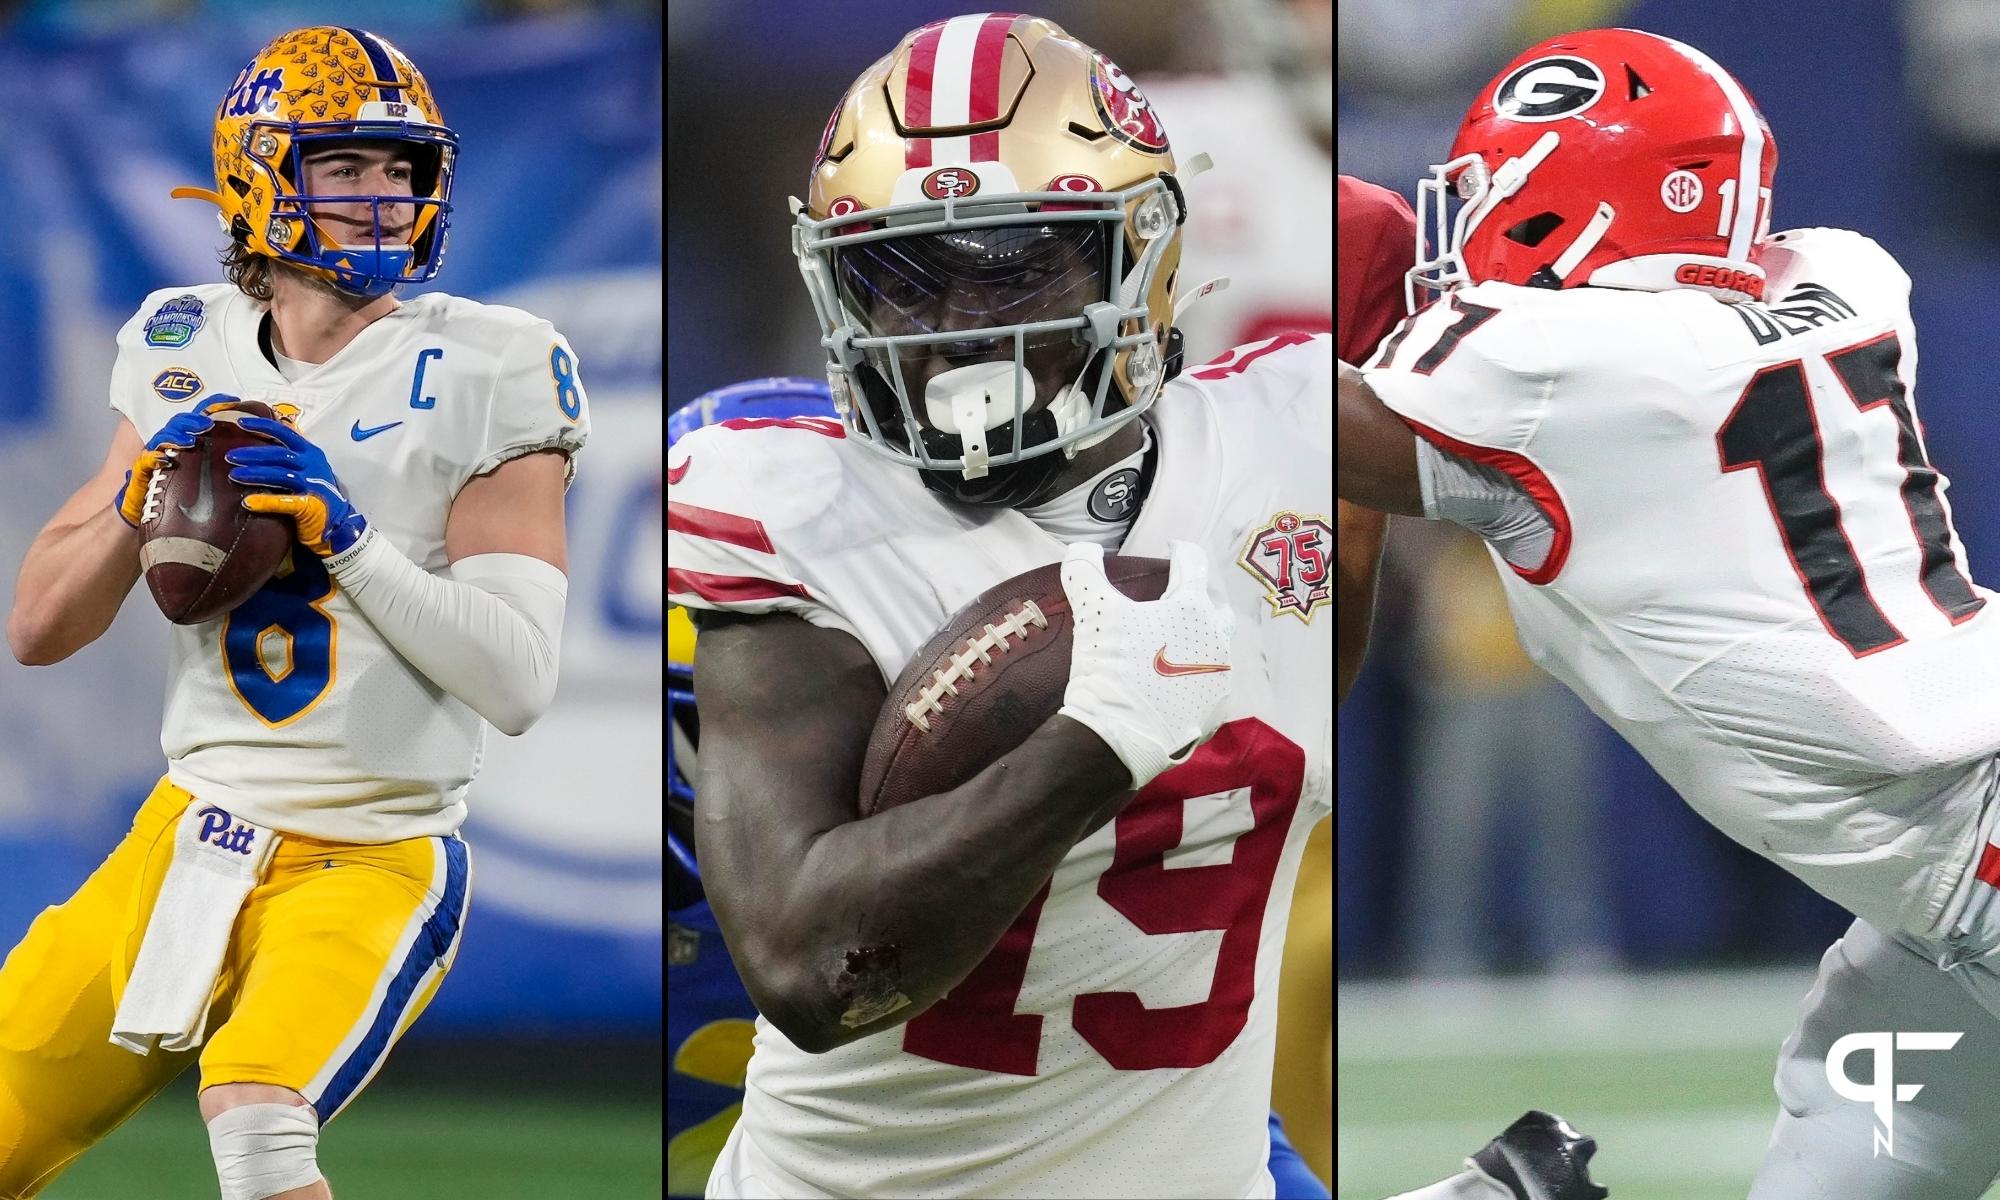 2022 NFL Draft News and Rumors: Will the Saints, Seahawks, and Steelers take first-round QBs?